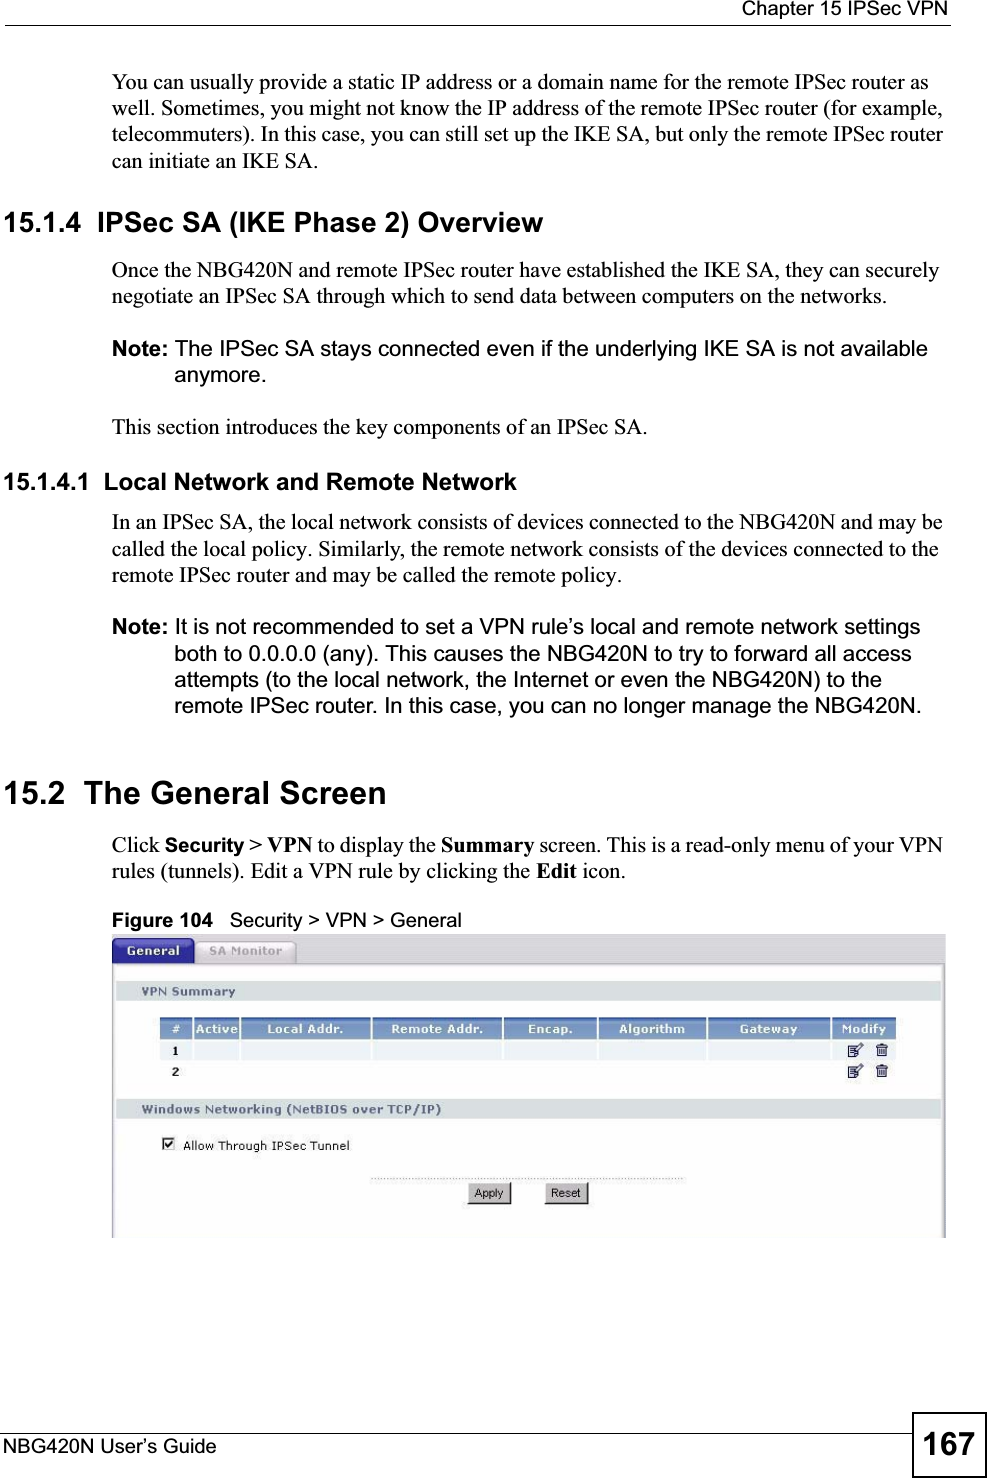  Chapter 15 IPSec VPNNBG420N User’s Guide 167You can usually provide a static IP address or a domain name for the remote IPSec router as well. Sometimes, you might not know the IP address of the remote IPSec router (for example, telecommuters). In this case, you can still set up the IKE SA, but only the remote IPSec router can initiate an IKE SA.15.1.4  IPSec SA (IKE Phase 2) OverviewOnce the NBG420N and remote IPSec router have established the IKE SA, they can securely negotiate an IPSec SA through which to send data between computers on the networks.Note: The IPSec SA stays connected even if the underlying IKE SA is not available anymore.This section introduces the key components of an IPSec SA.15.1.4.1  Local Network and Remote NetworkIn an IPSec SA, the local network consists of devices connected to the NBG420N and may be called the local policy. Similarly, the remote network consists of the devices connected to the remote IPSec router and may be called the remote policy.Note: It is not recommended to set a VPN rule’s local and remote network settings both to 0.0.0.0 (any). This causes the NBG420N to try to forward all access attempts (to the local network, the Internet or even the NBG420N) to the remote IPSec router. In this case, you can no longer manage the NBG420N.15.2  The General ScreenClick Security &gt; VPN to display the Summary screen. This is a read-only menu of your VPN rules (tunnels). Edit a VPN rule by clicking the Edit icon.Figure 104   Security &gt; VPN &gt; General